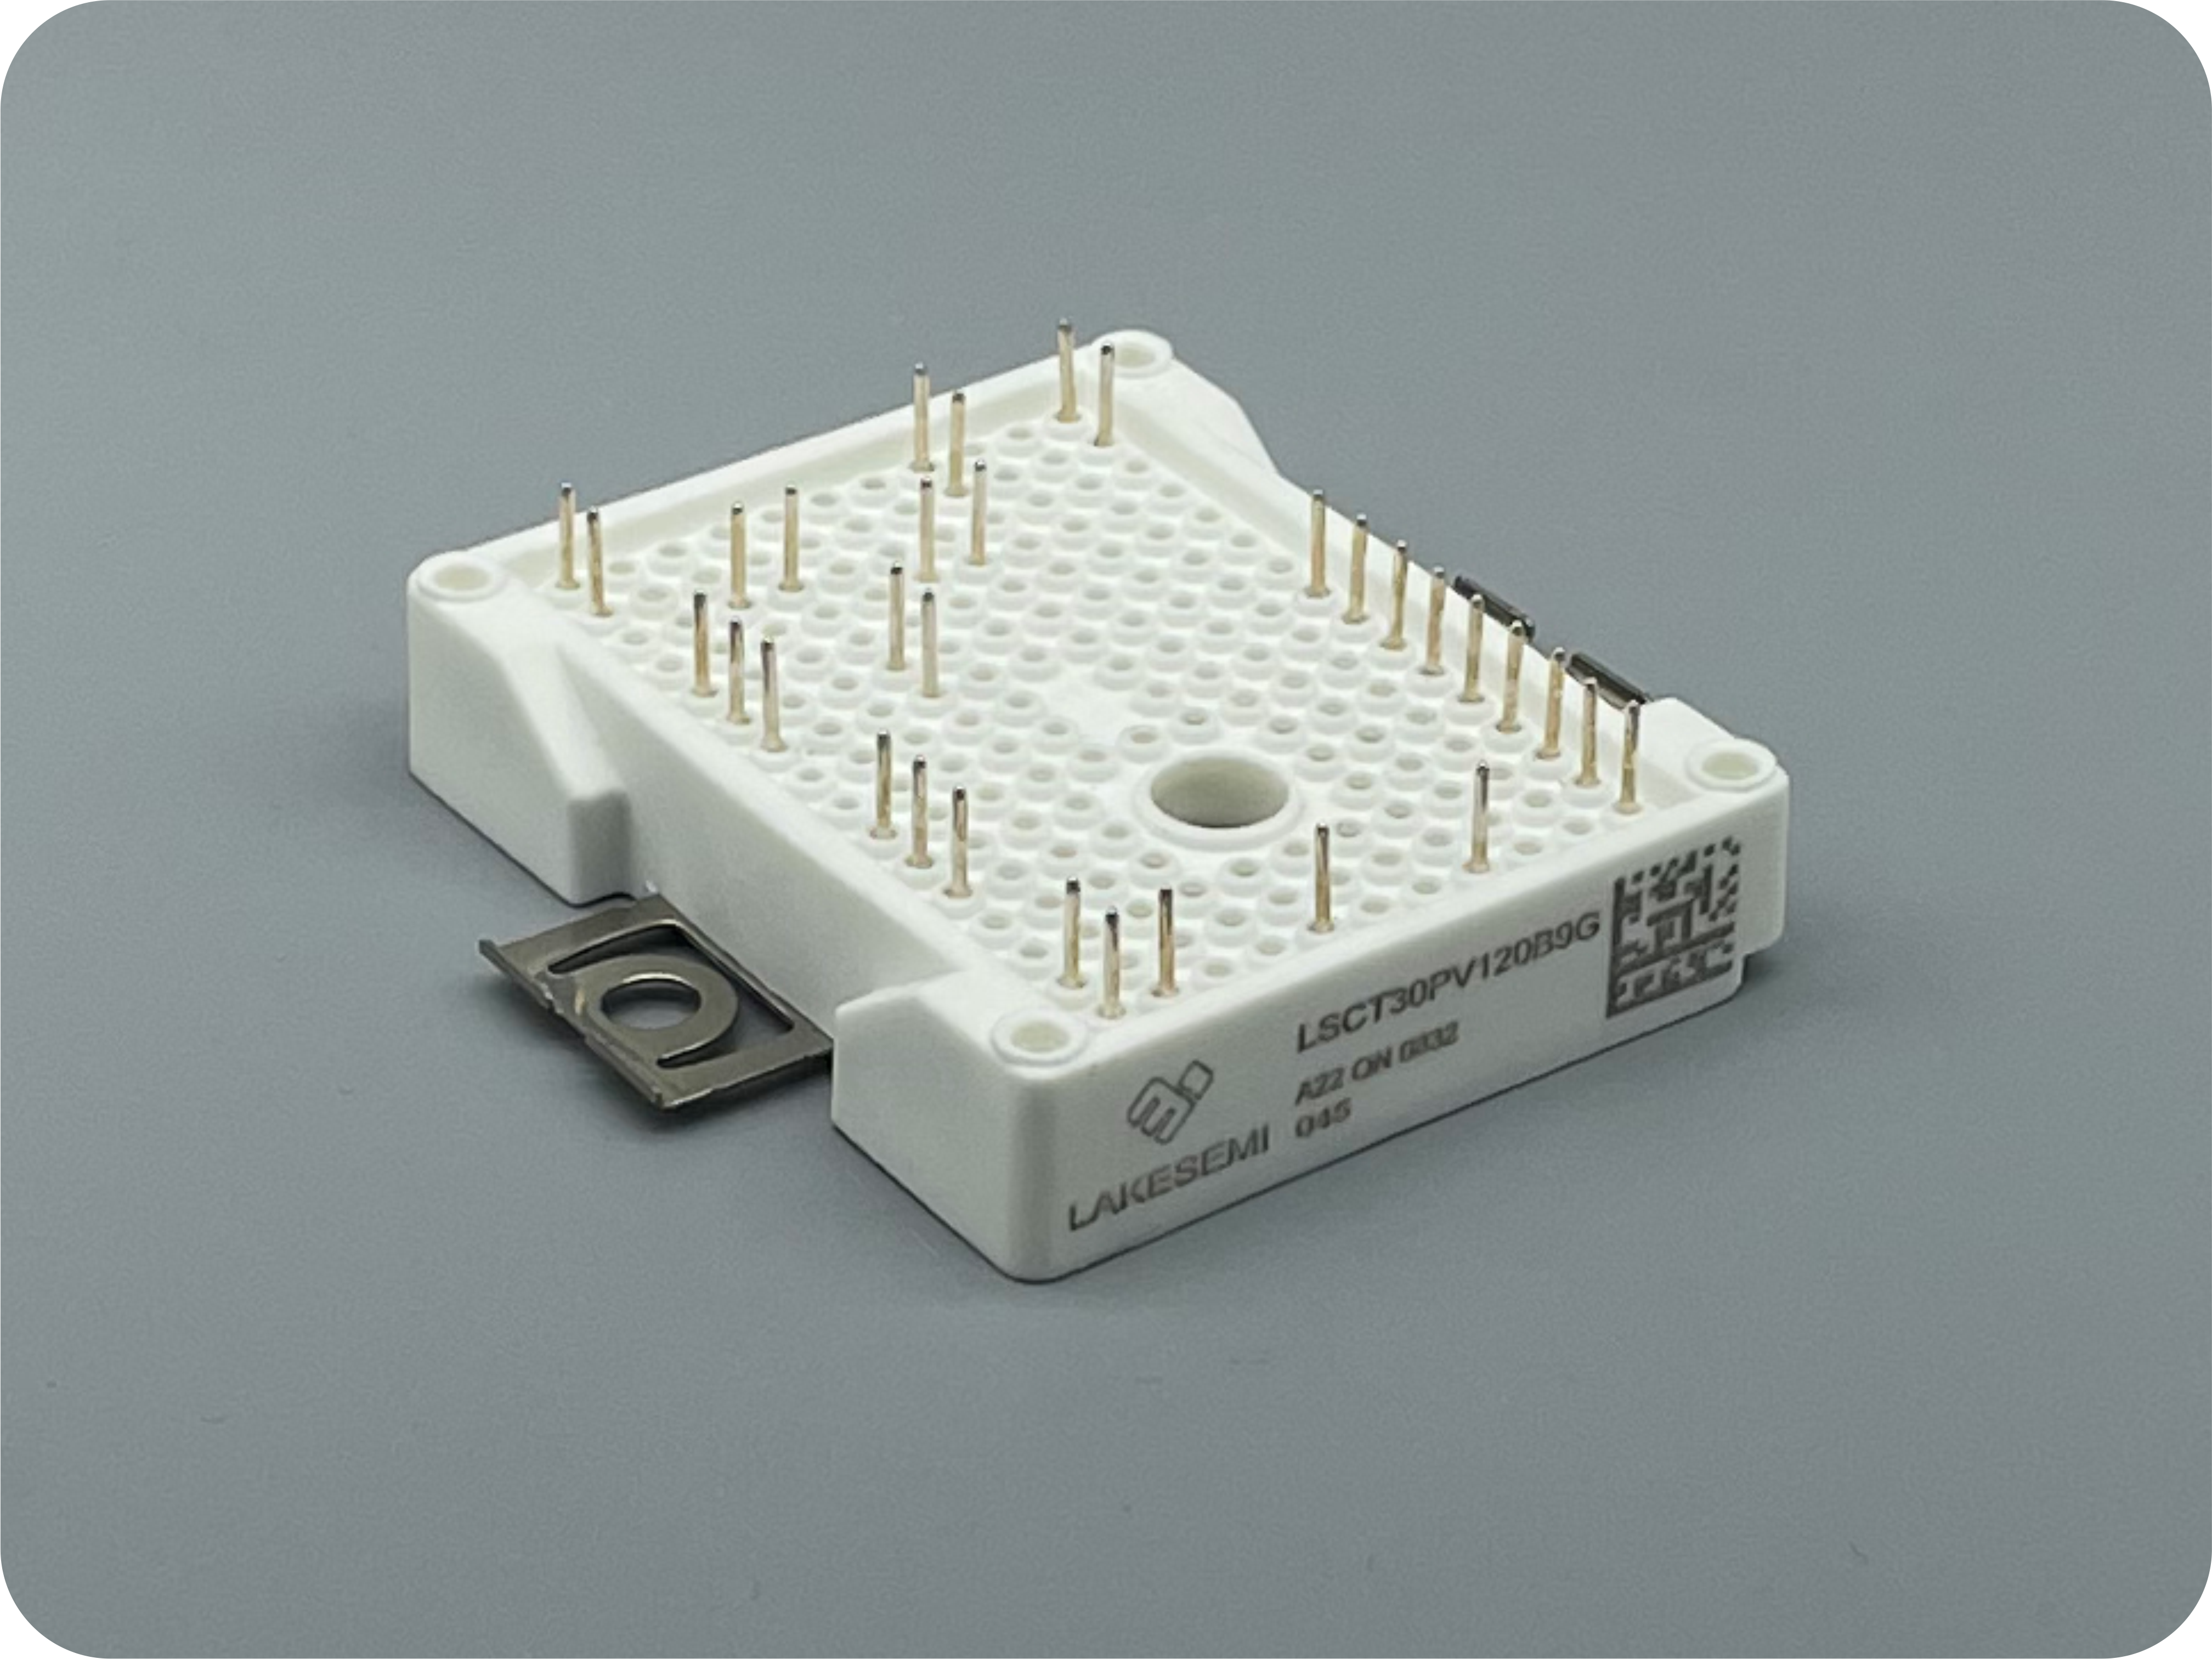 The industry-first 1200V SiC Full Bridge and Rectifier Module